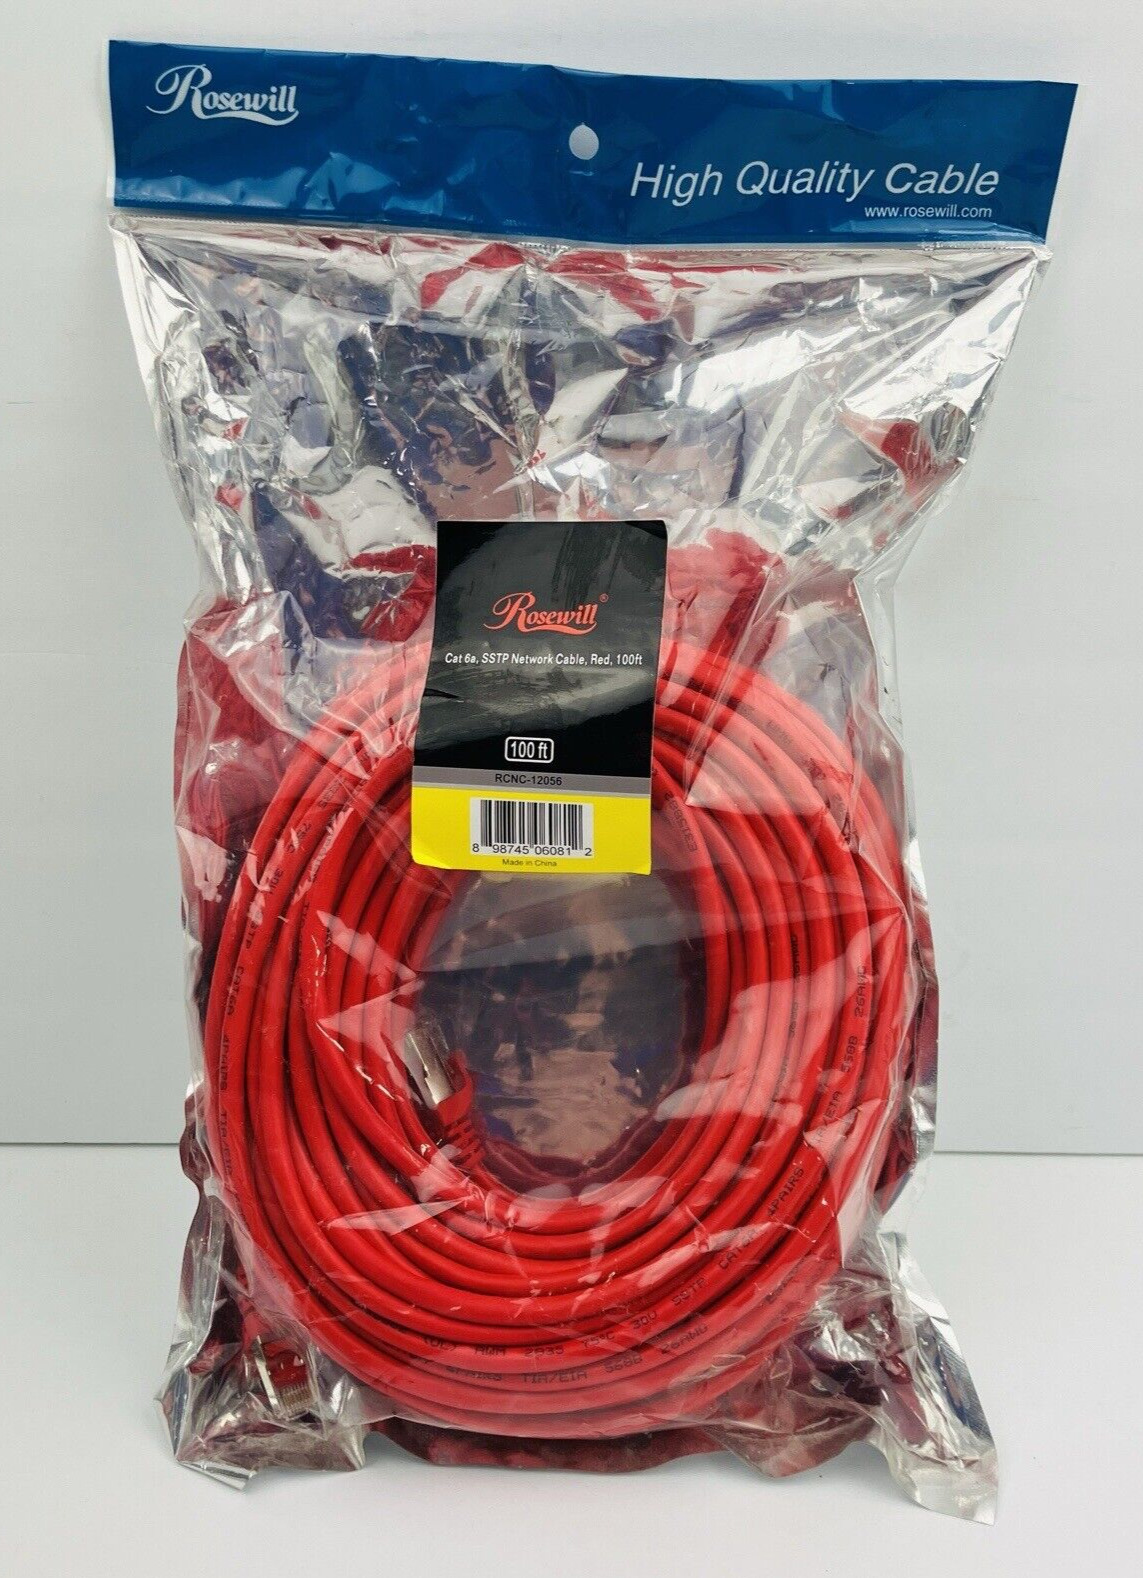 NEW Rosewill 100' SSTP Ethernet Cat 6a Cable RCNC-12056